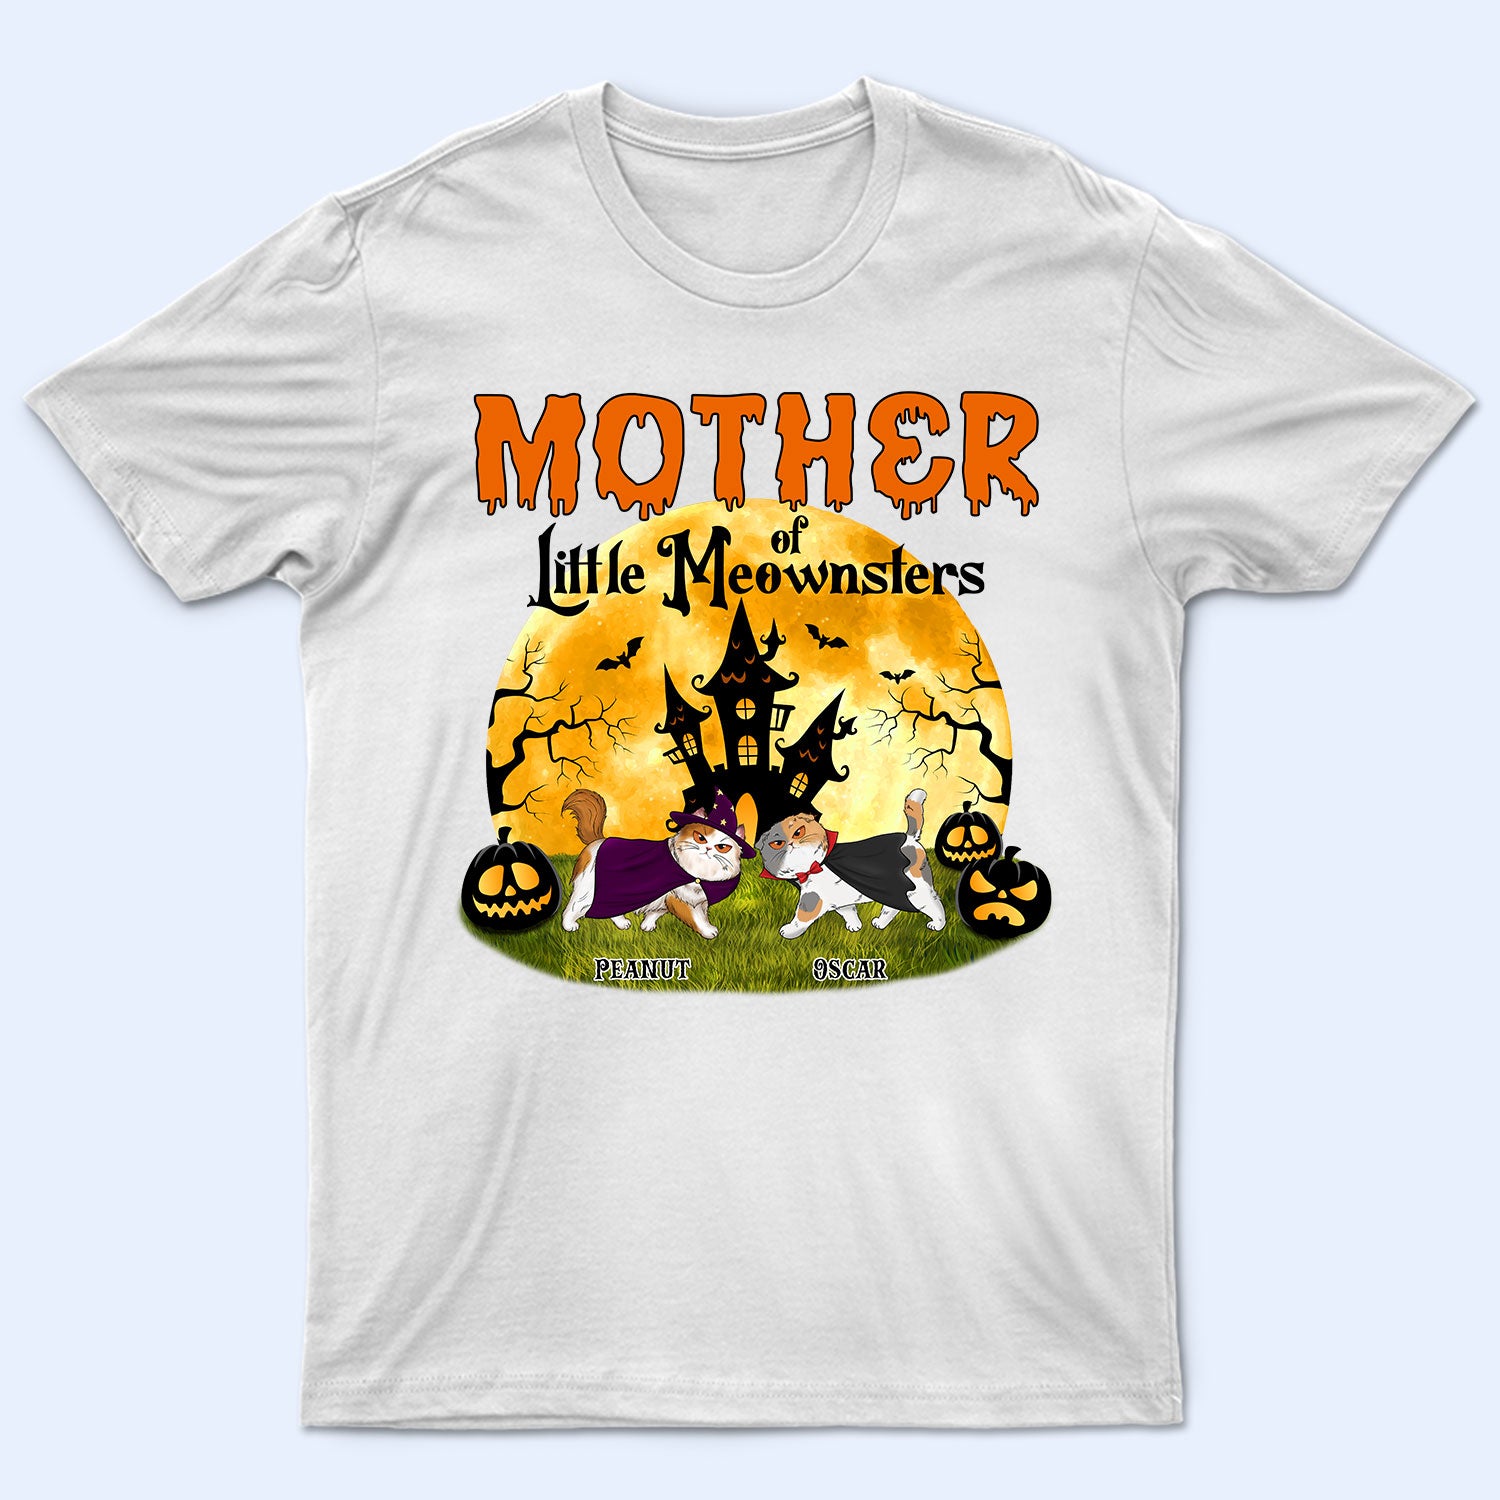 Mother Of Little Meownsters - Halloween Gift For Cat Lovers - Personalized T Shirt